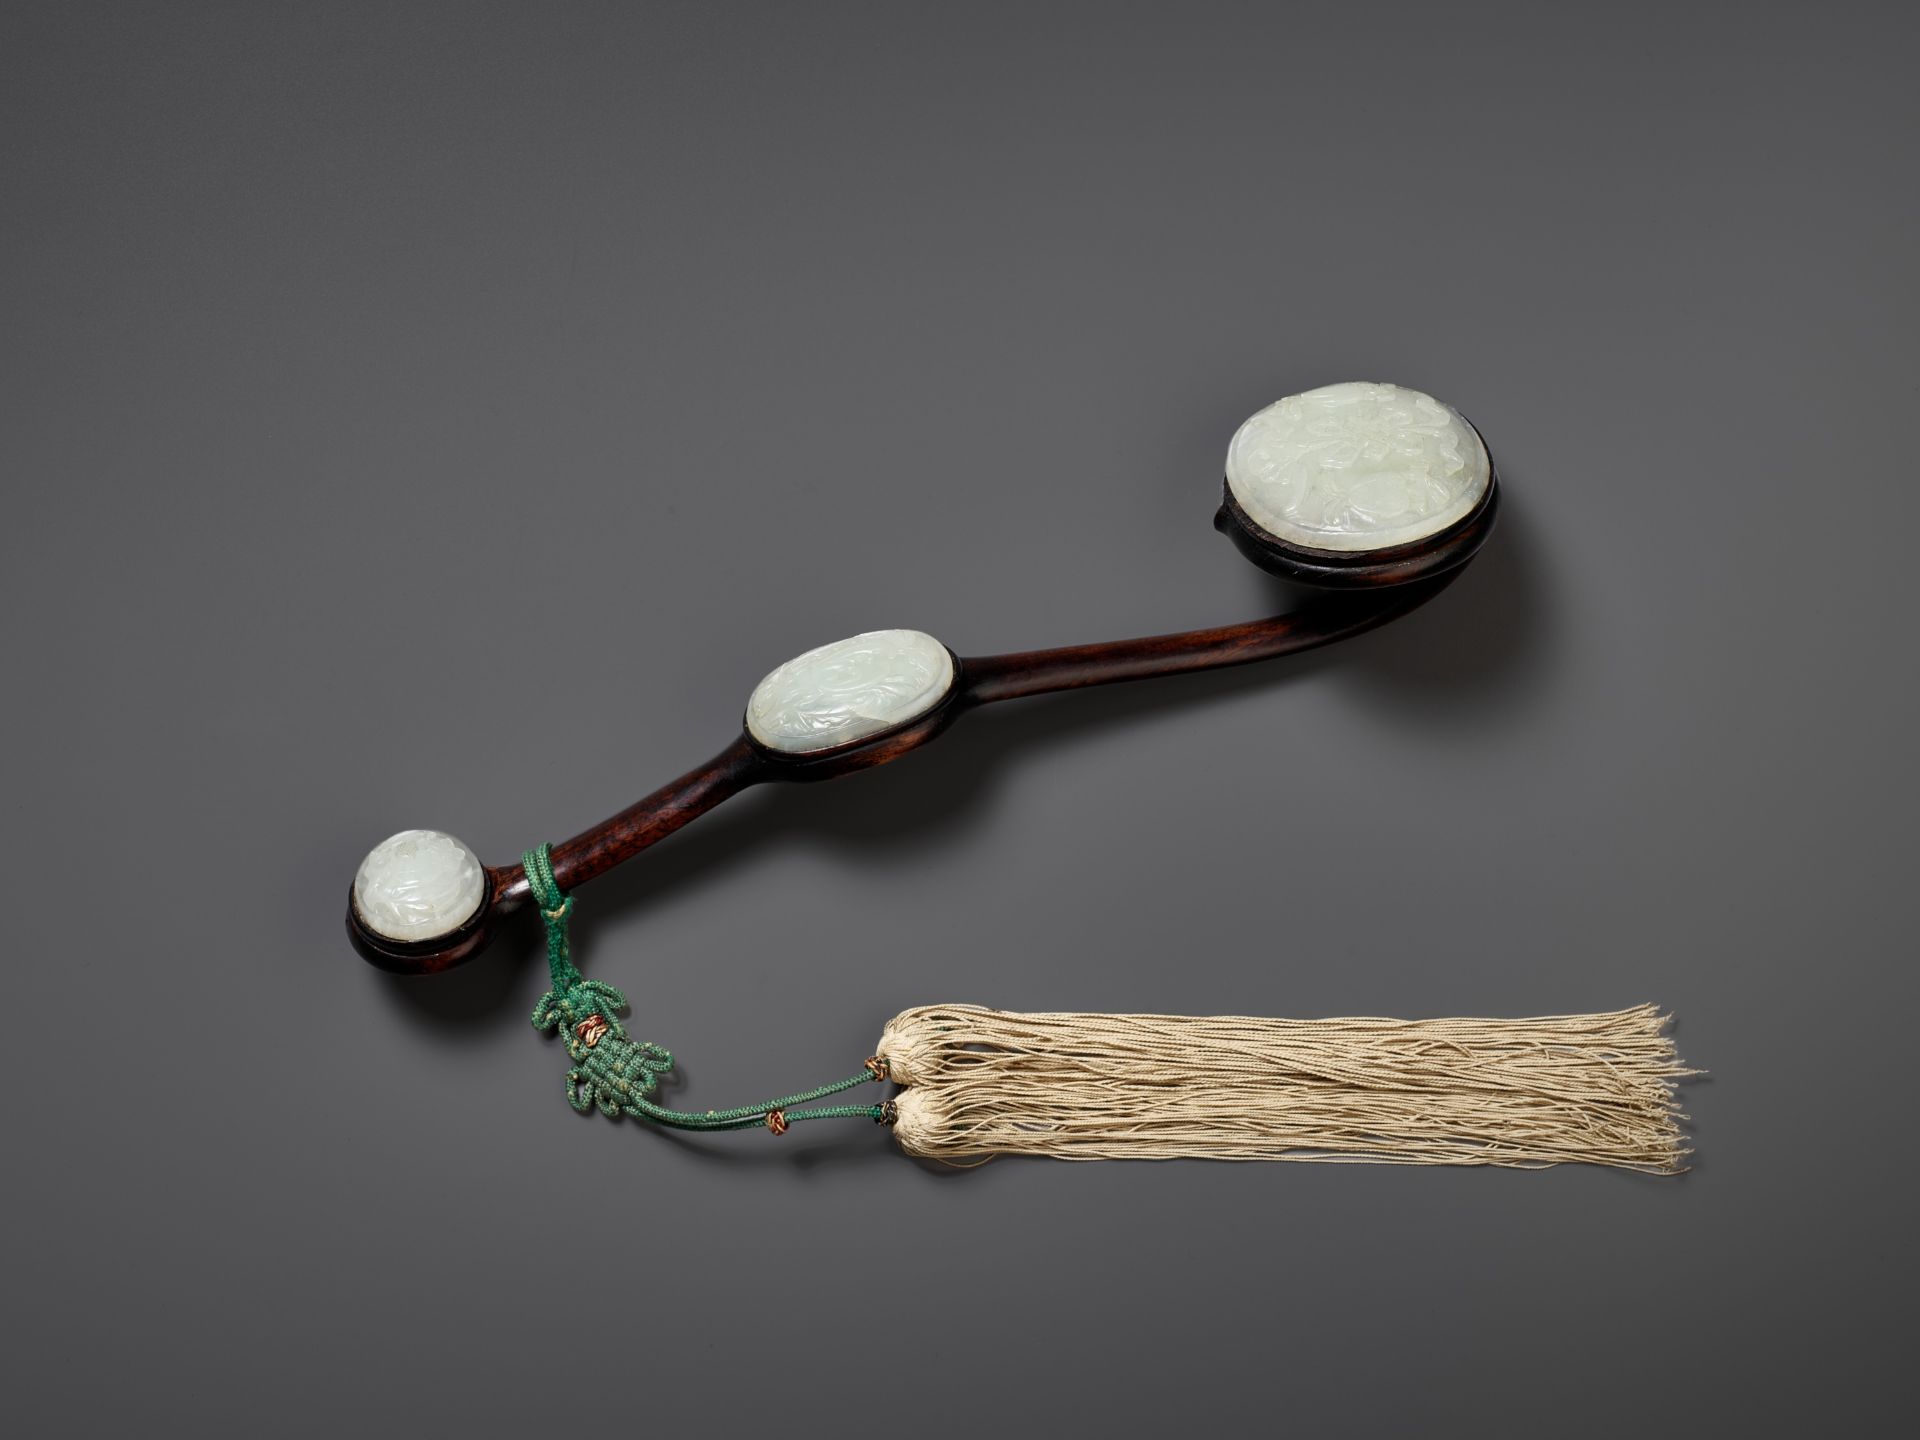 A PALE CELADON JADE-MOUNTED WOOD RUYI SCEPTER, QING DYNASTY - Image 6 of 12